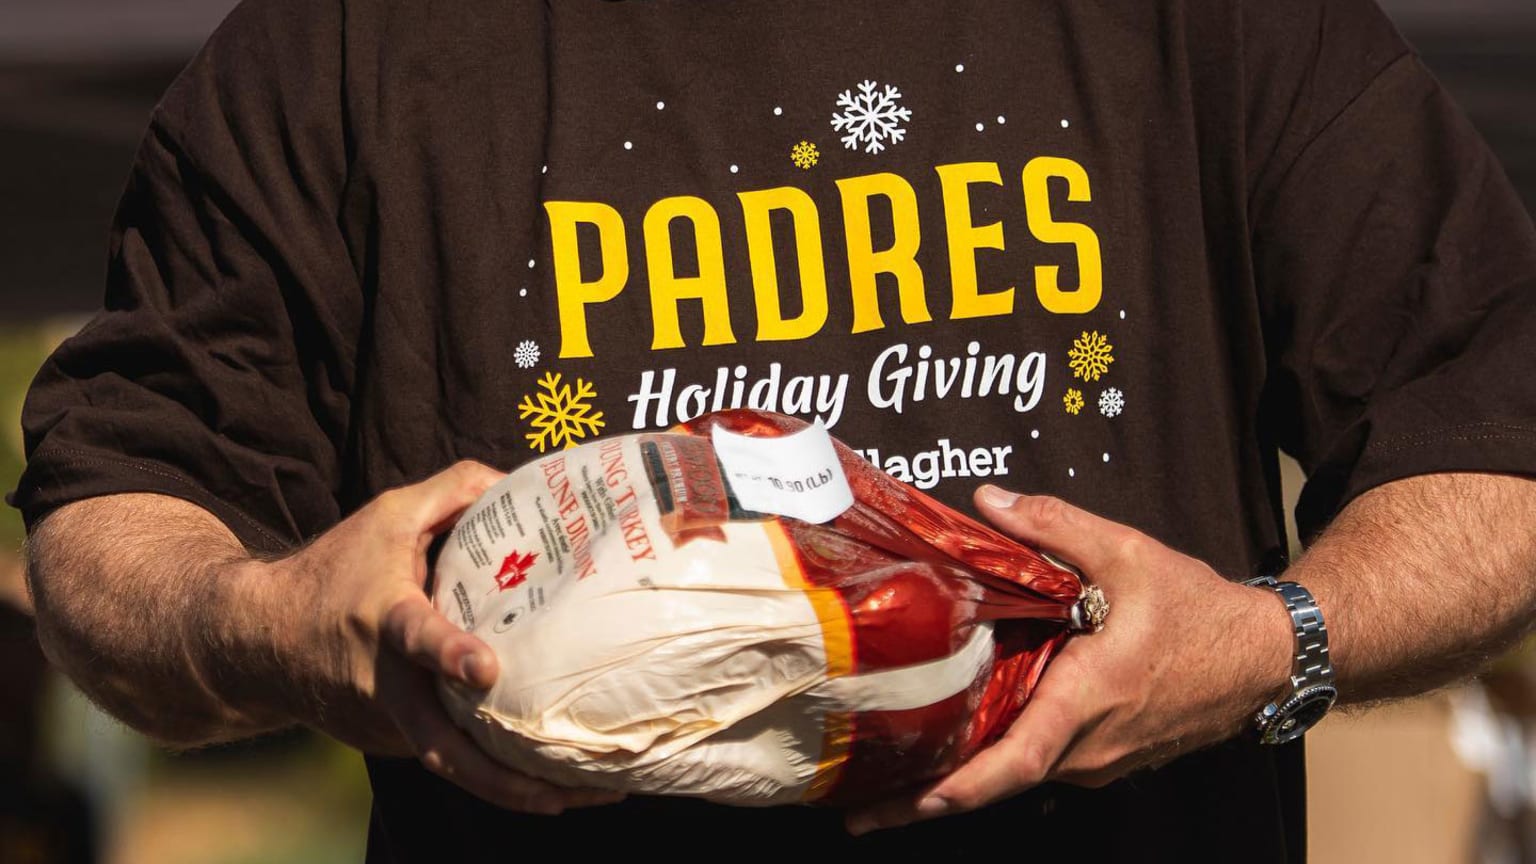 A man wearing a Padres shirt holds a Thanksgiving turkey